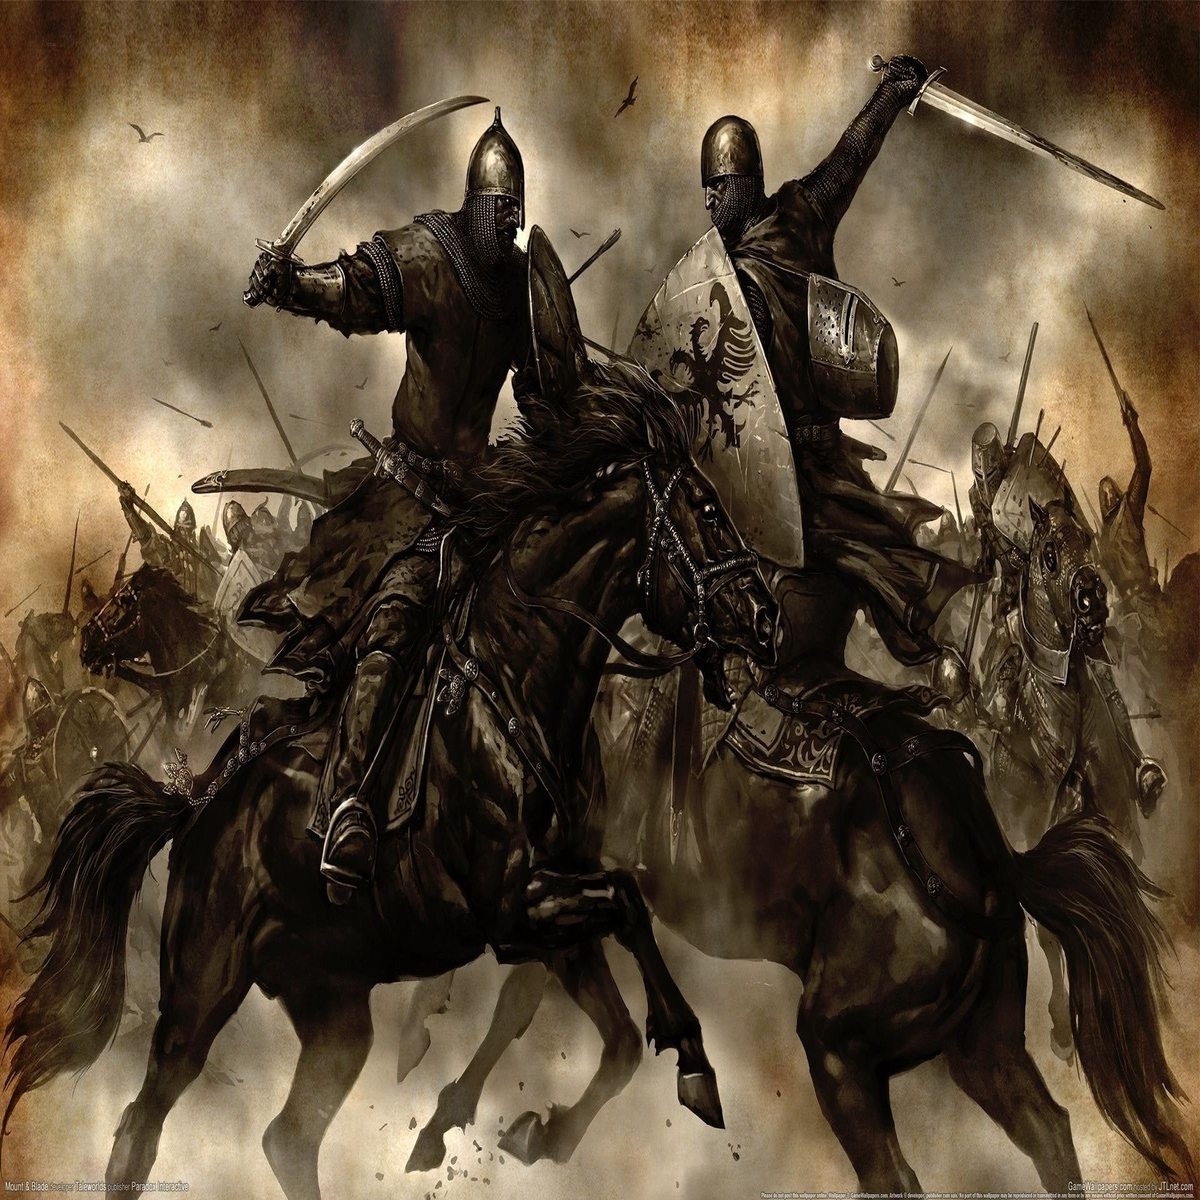 A Clash of Kings (Game of Thrones) mod for Mount & Blade: Warband